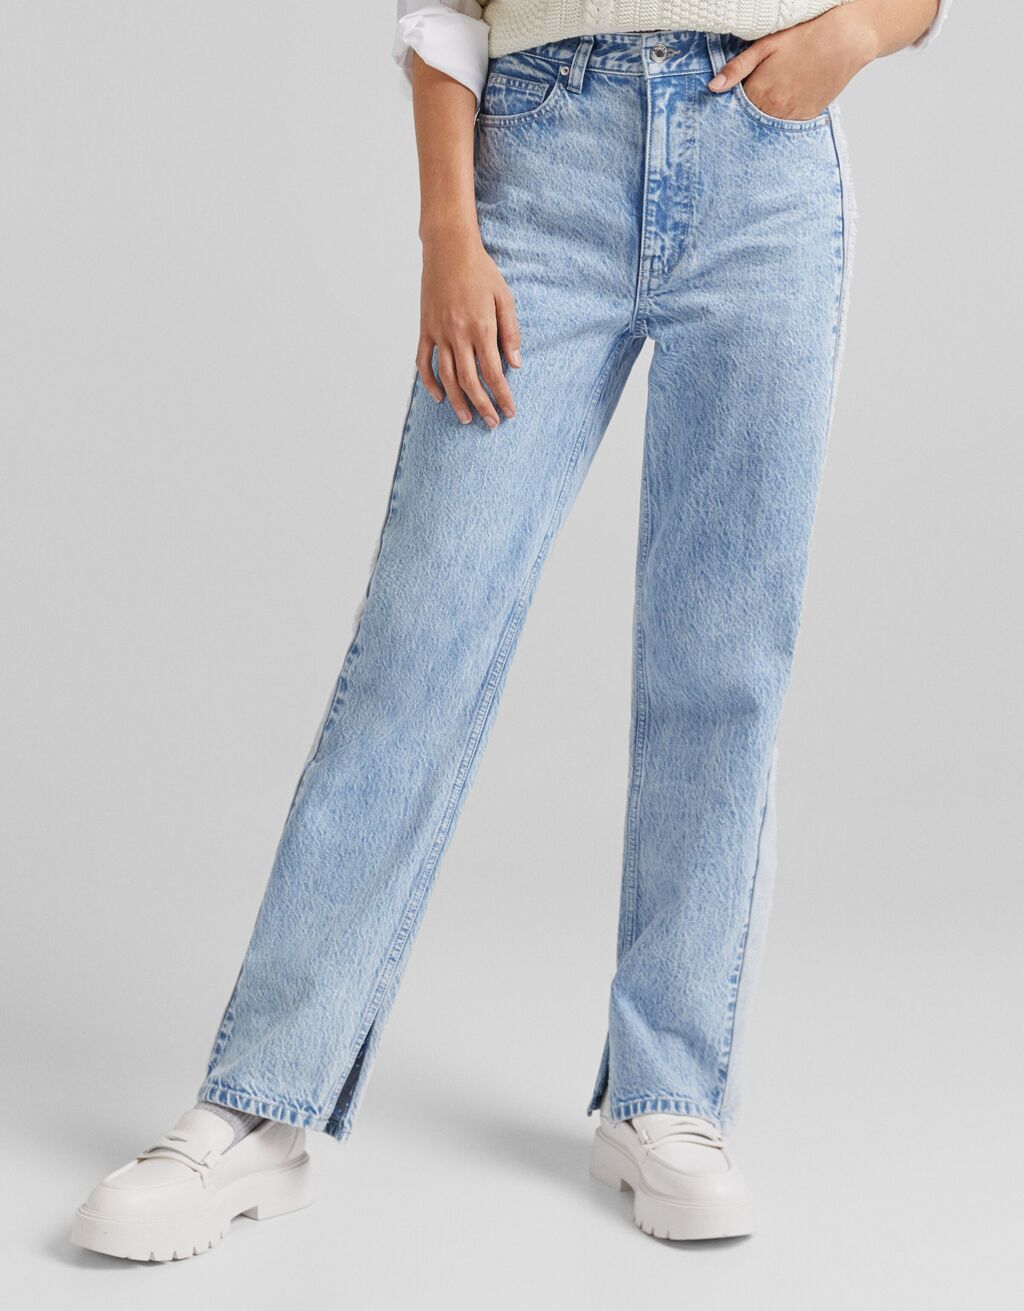 Contrast straight fit jeans